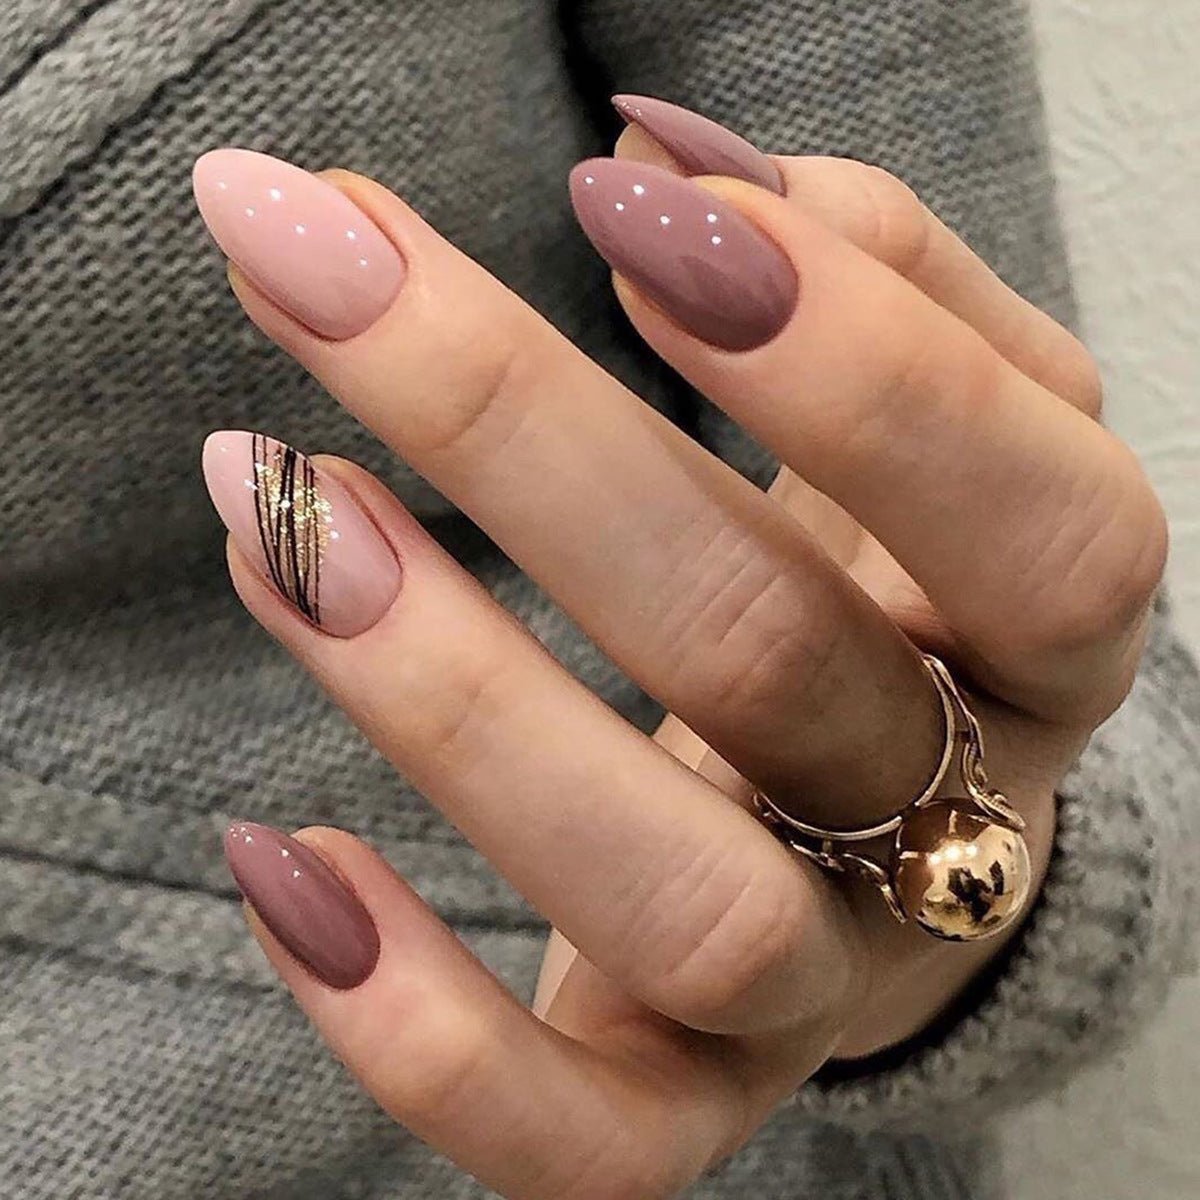 Almond Oblique Gold Thread Wearing Armor Finished Patch Waterproof False Nails - False Nails -  Trend Goods